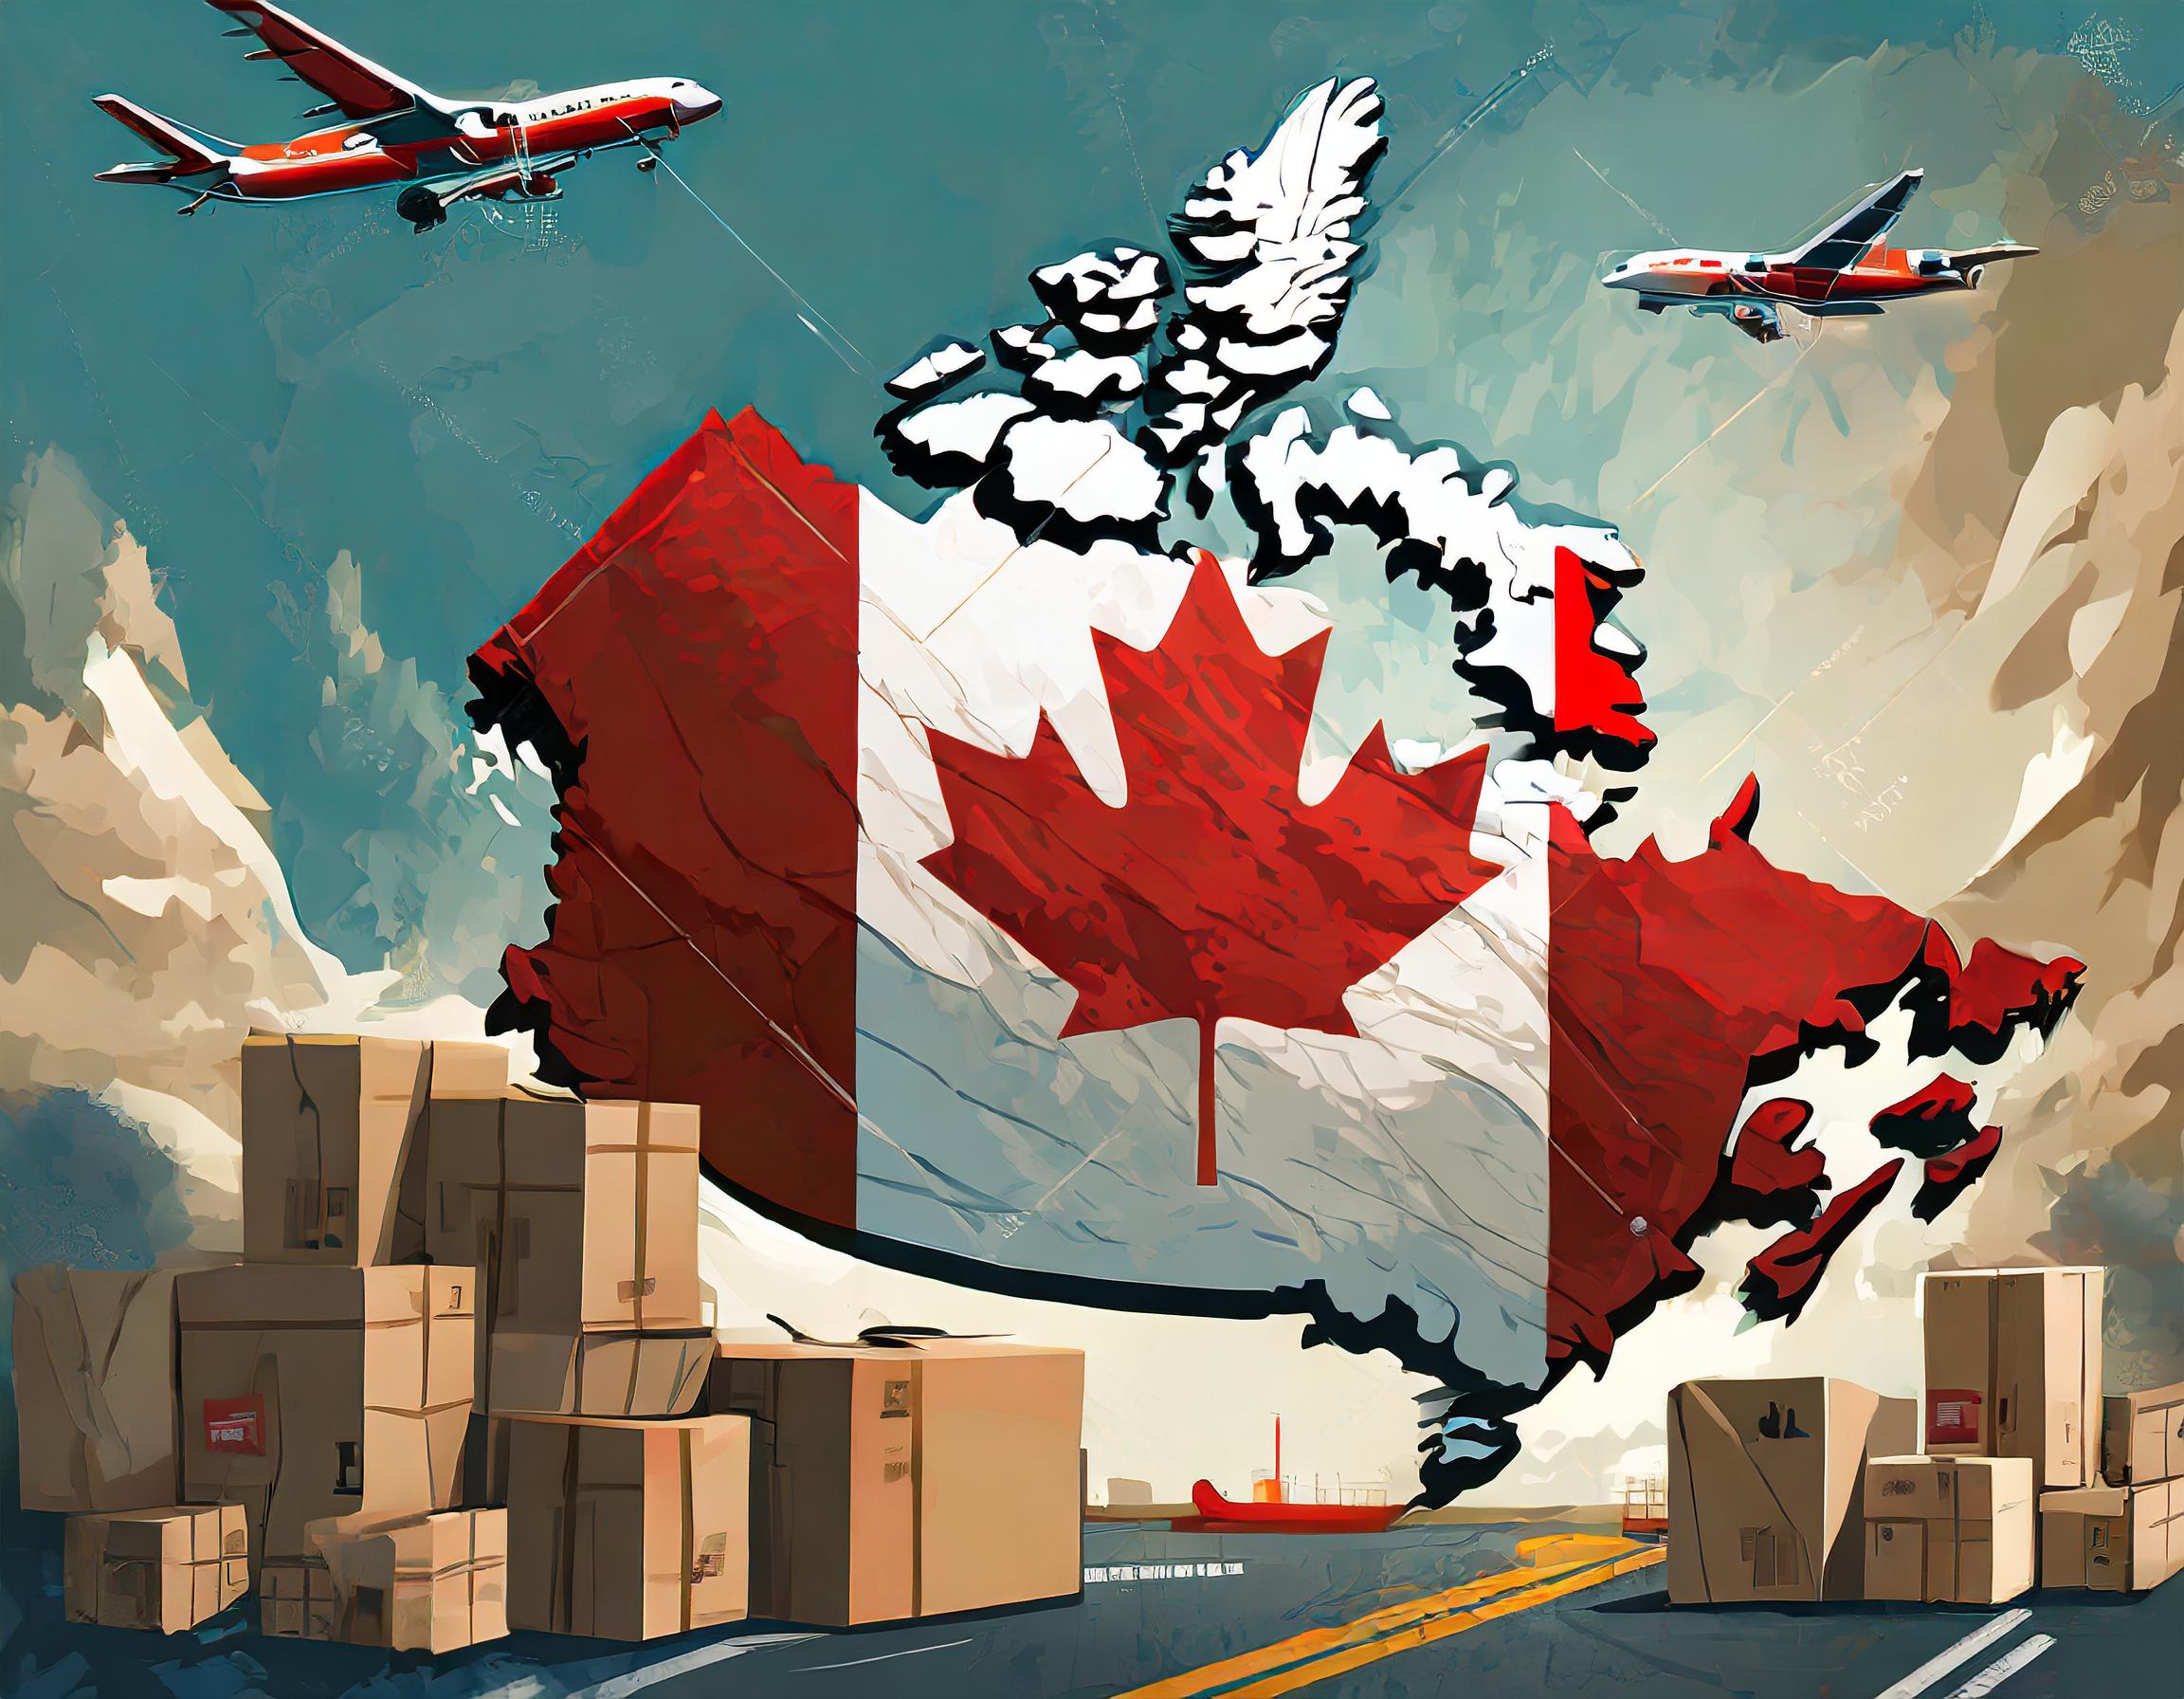 A map of Canada with parcels and a Canadian flag, representing parcel forwarding services in Canada